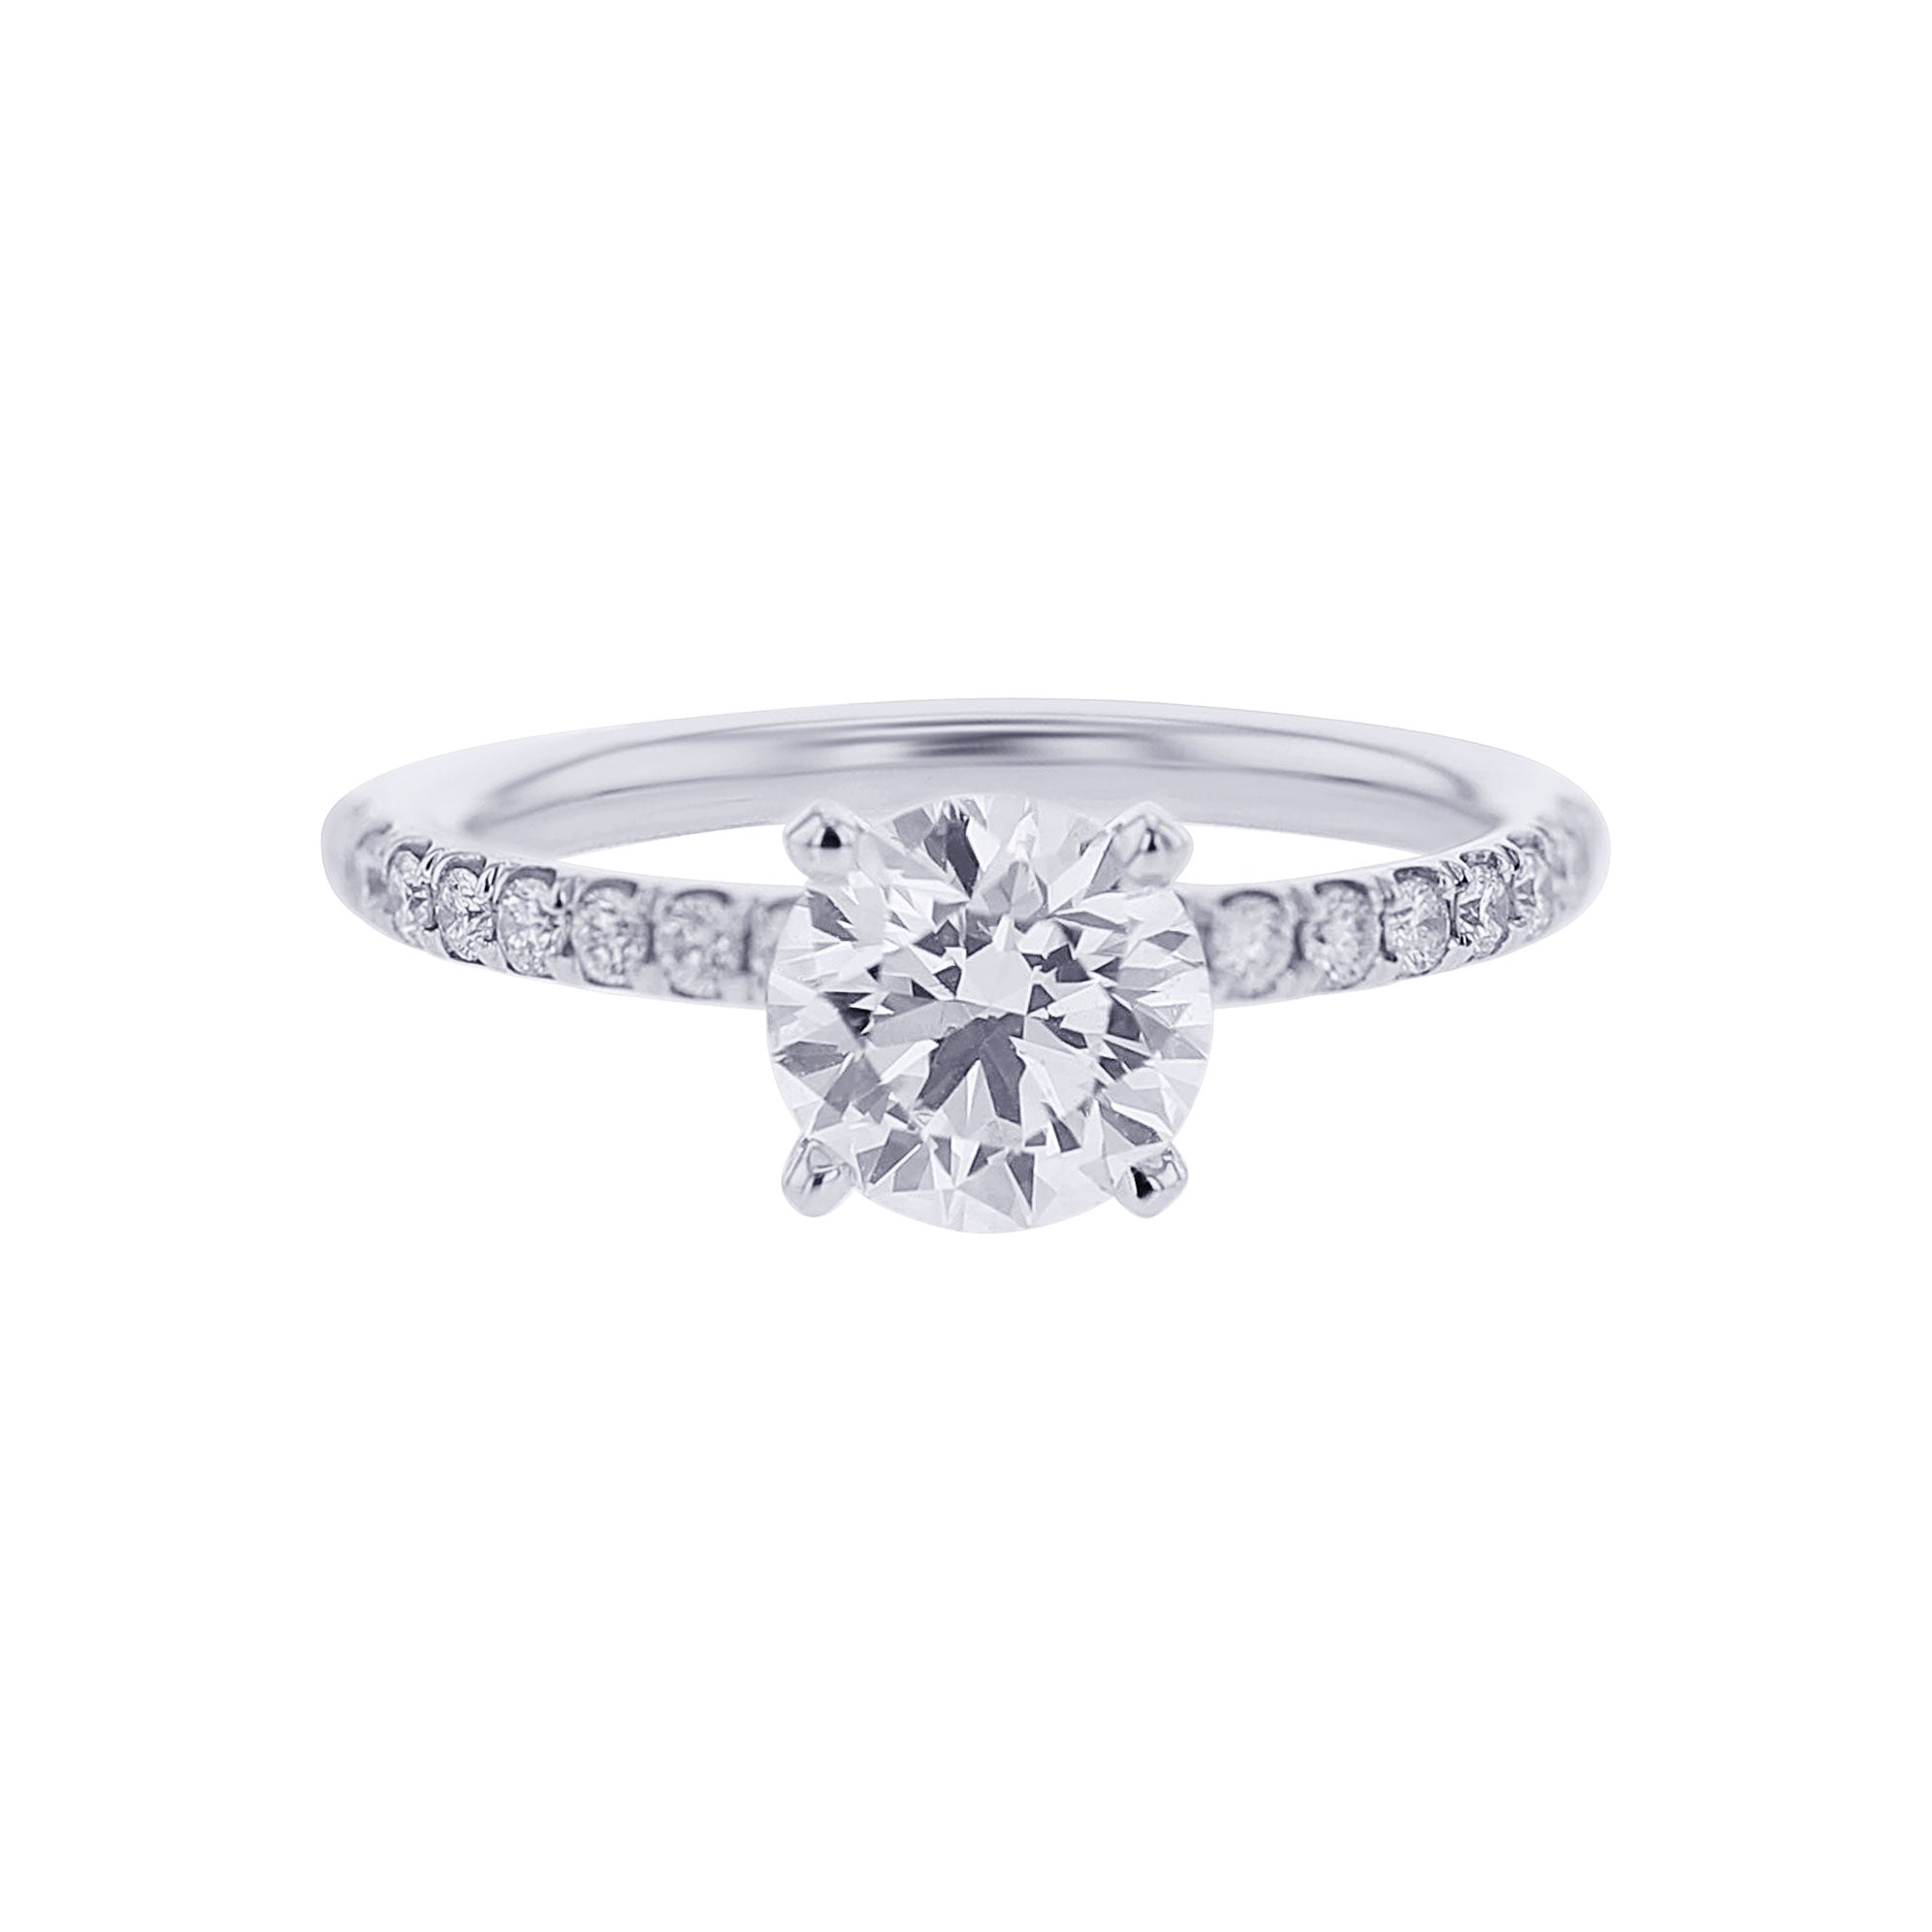 Gwendolyn Certified Ready for Love Engagement Ring 1 1/2ct